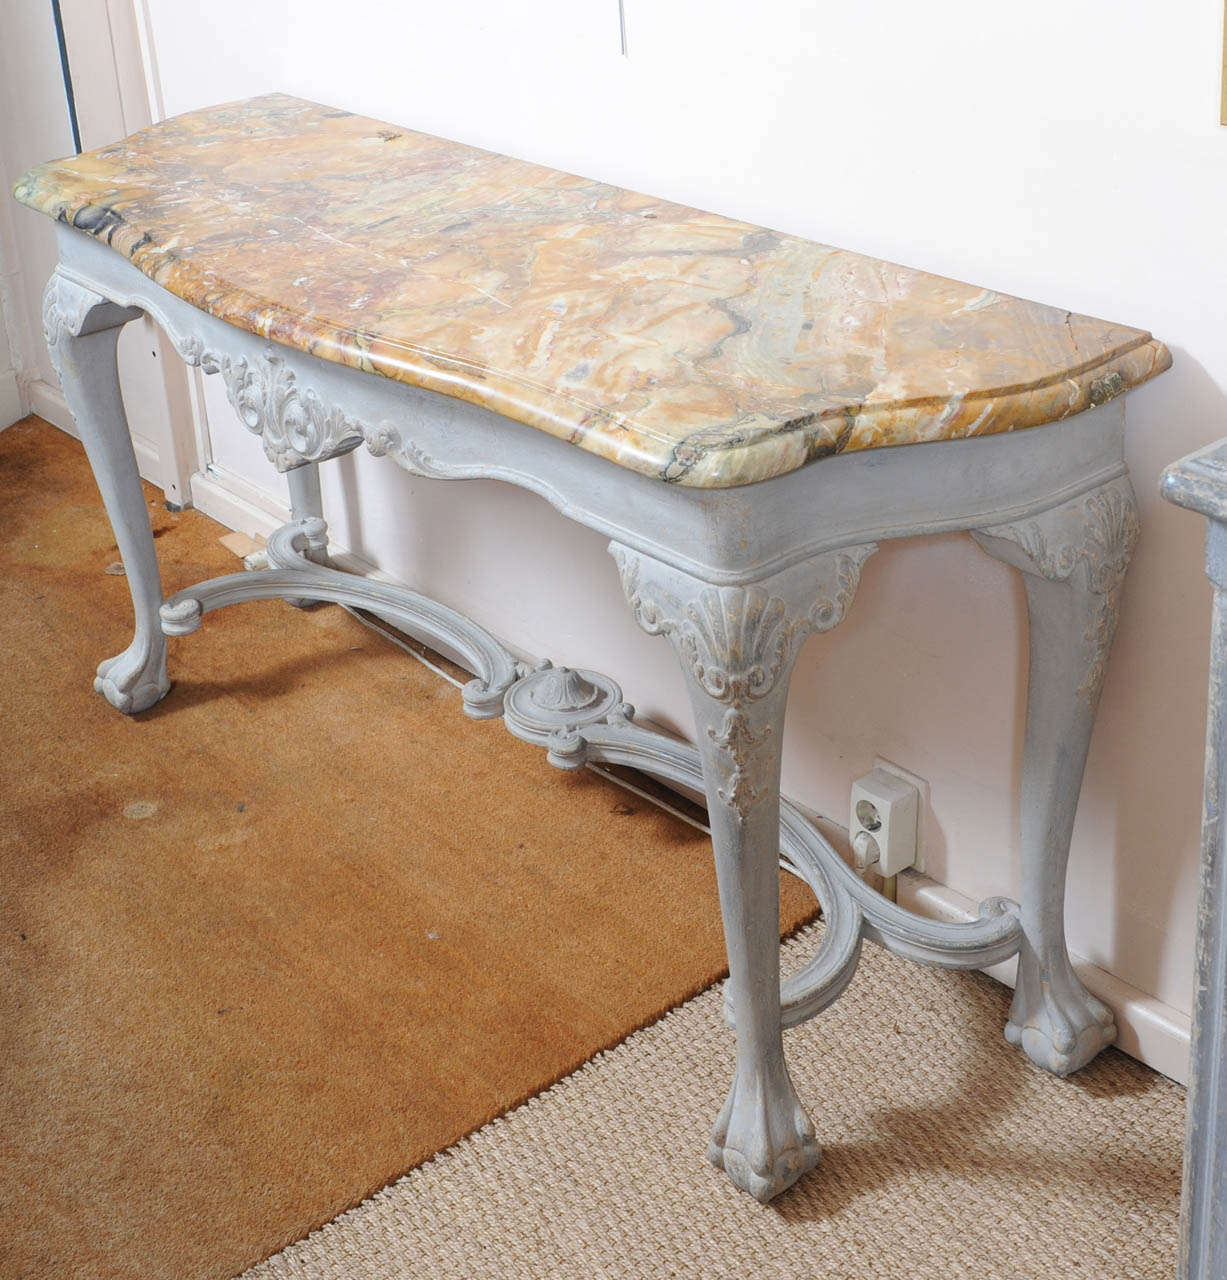 French mahogany console, patinated in blue/grey.
Marble top, with a restauration